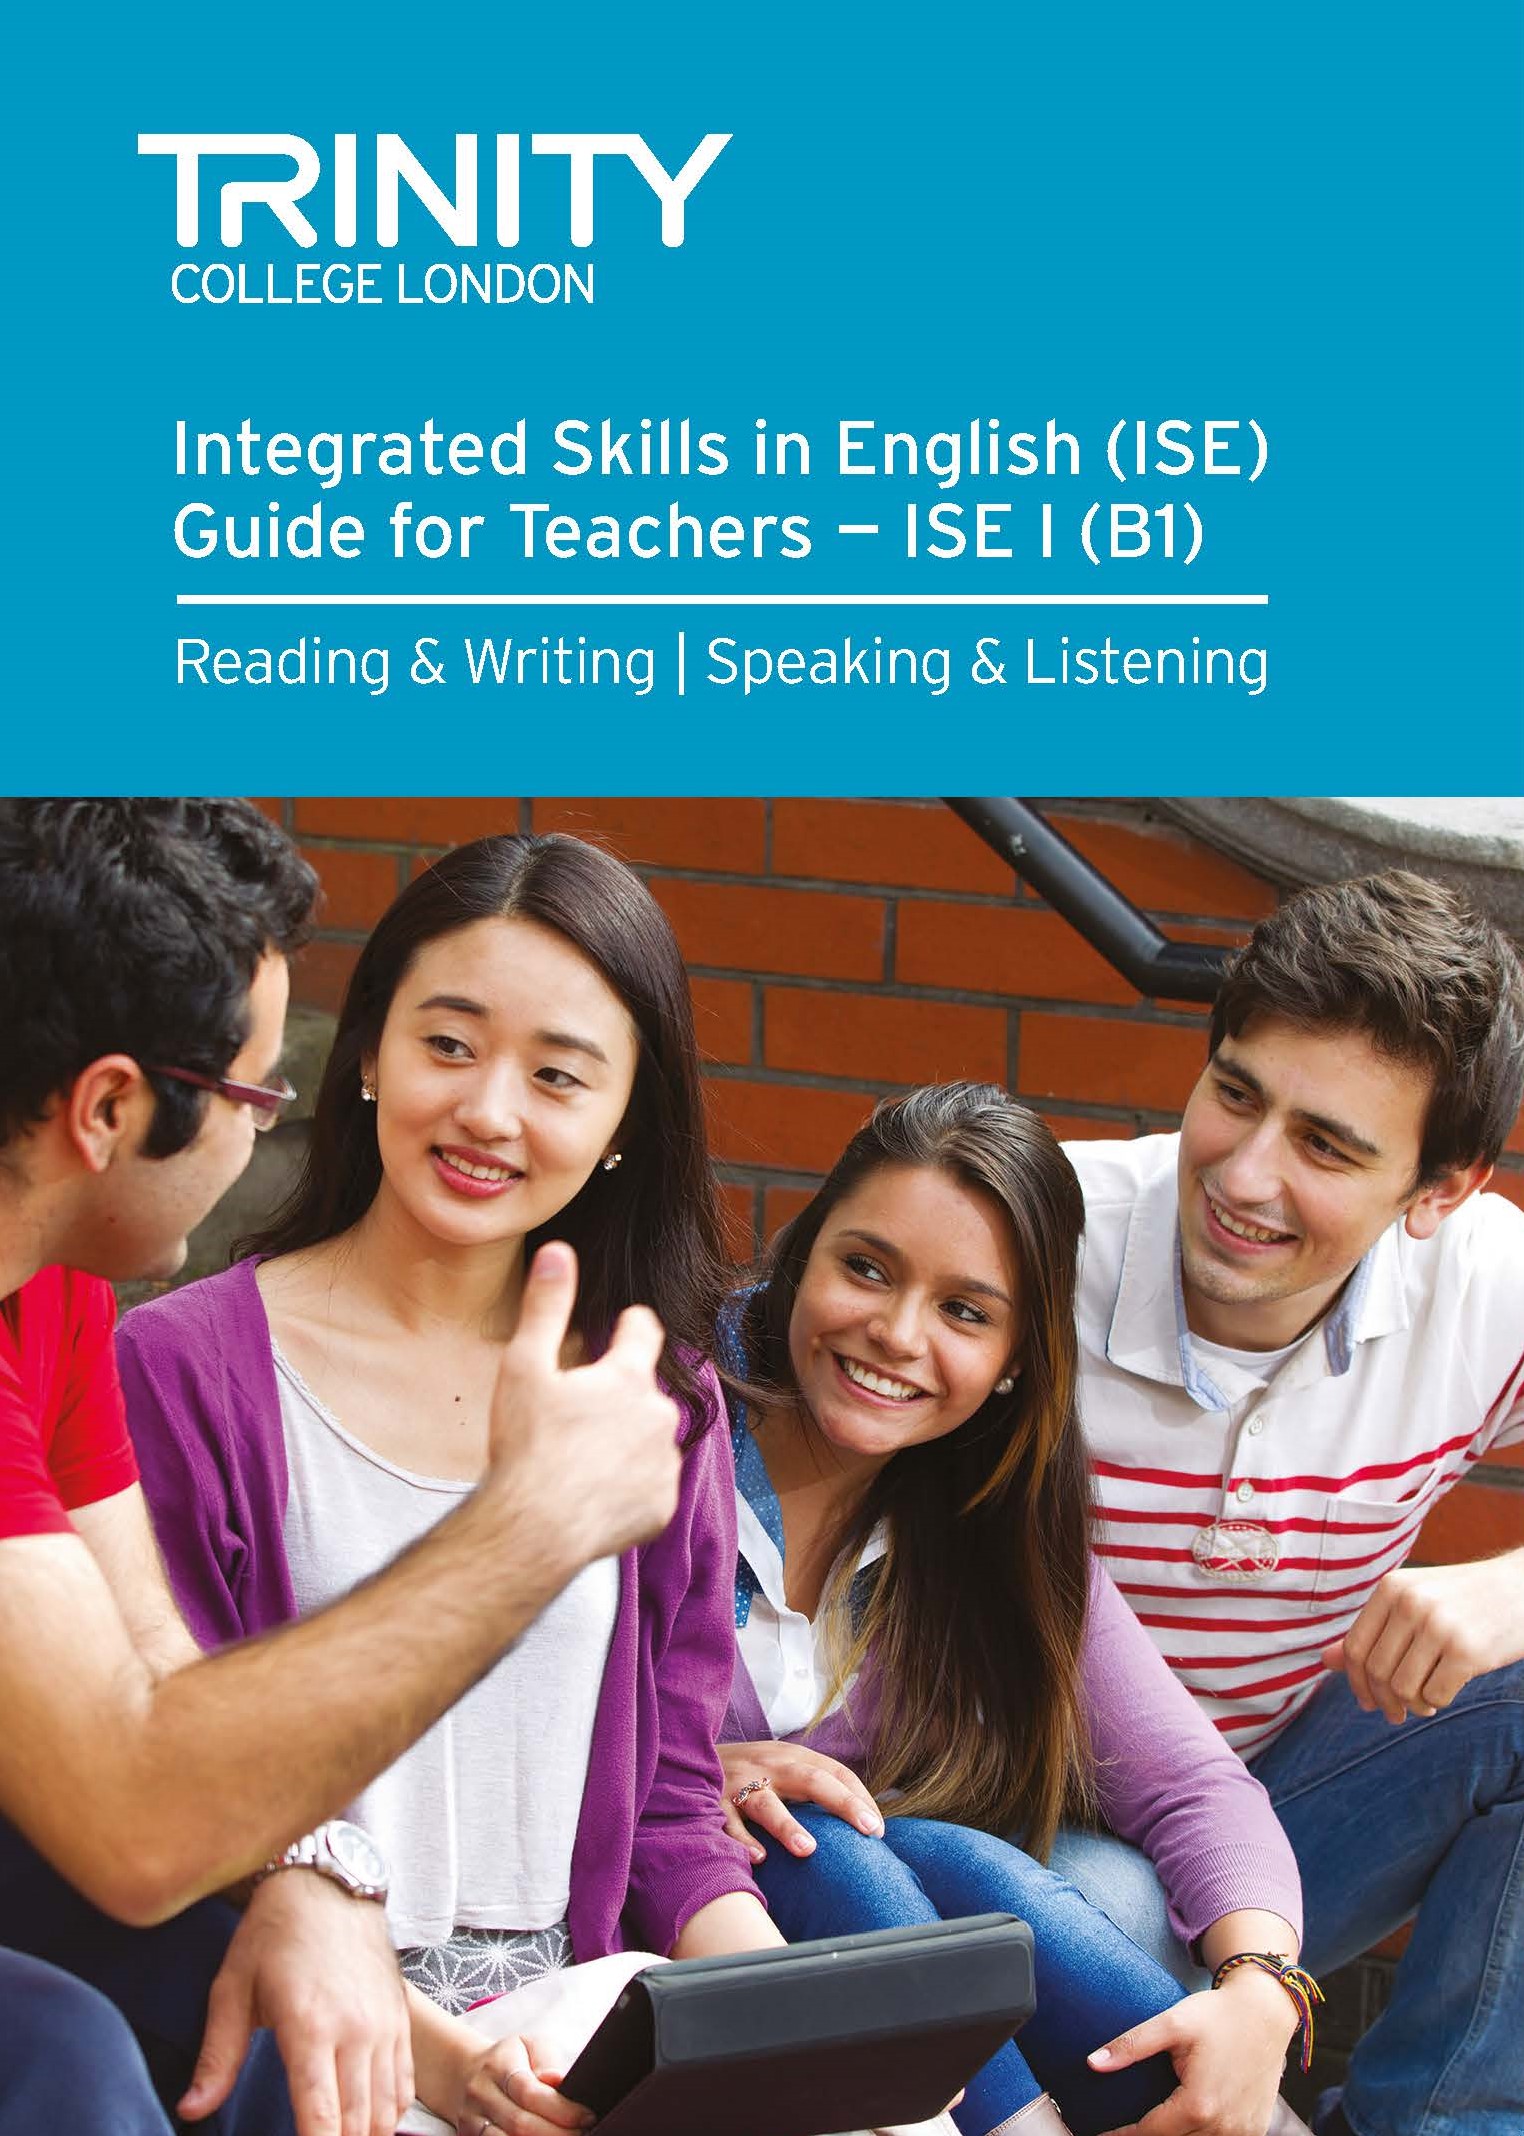 The front cover of the ISE I Guide for Teachers